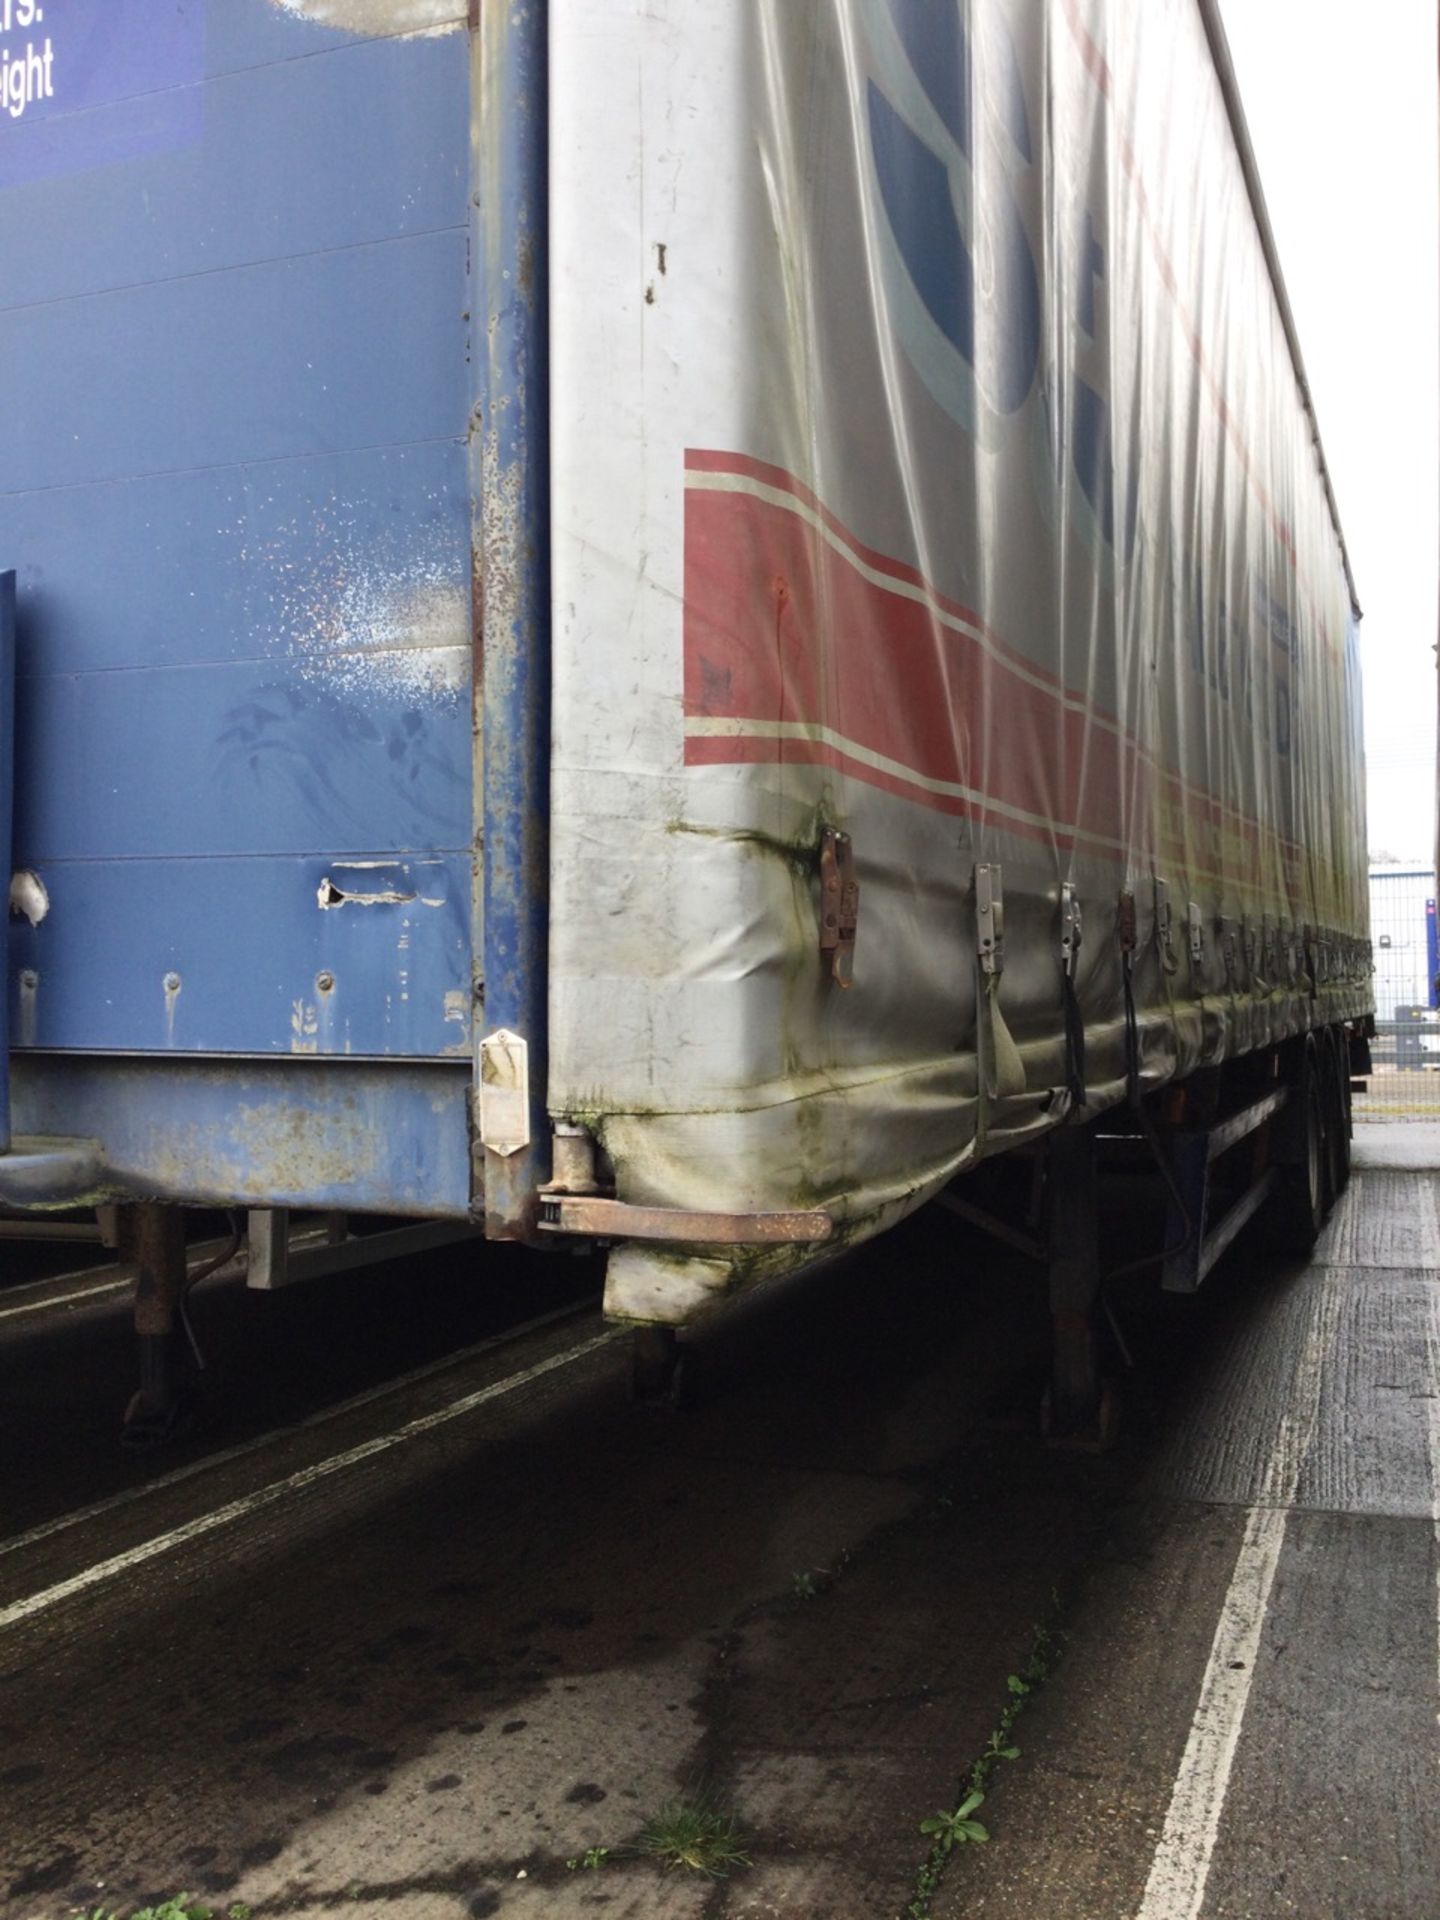 MONTRACON SMRC3A Tri-Axle Curtainside Trailer Mot Expired , serial number C064161 , year 2000. No